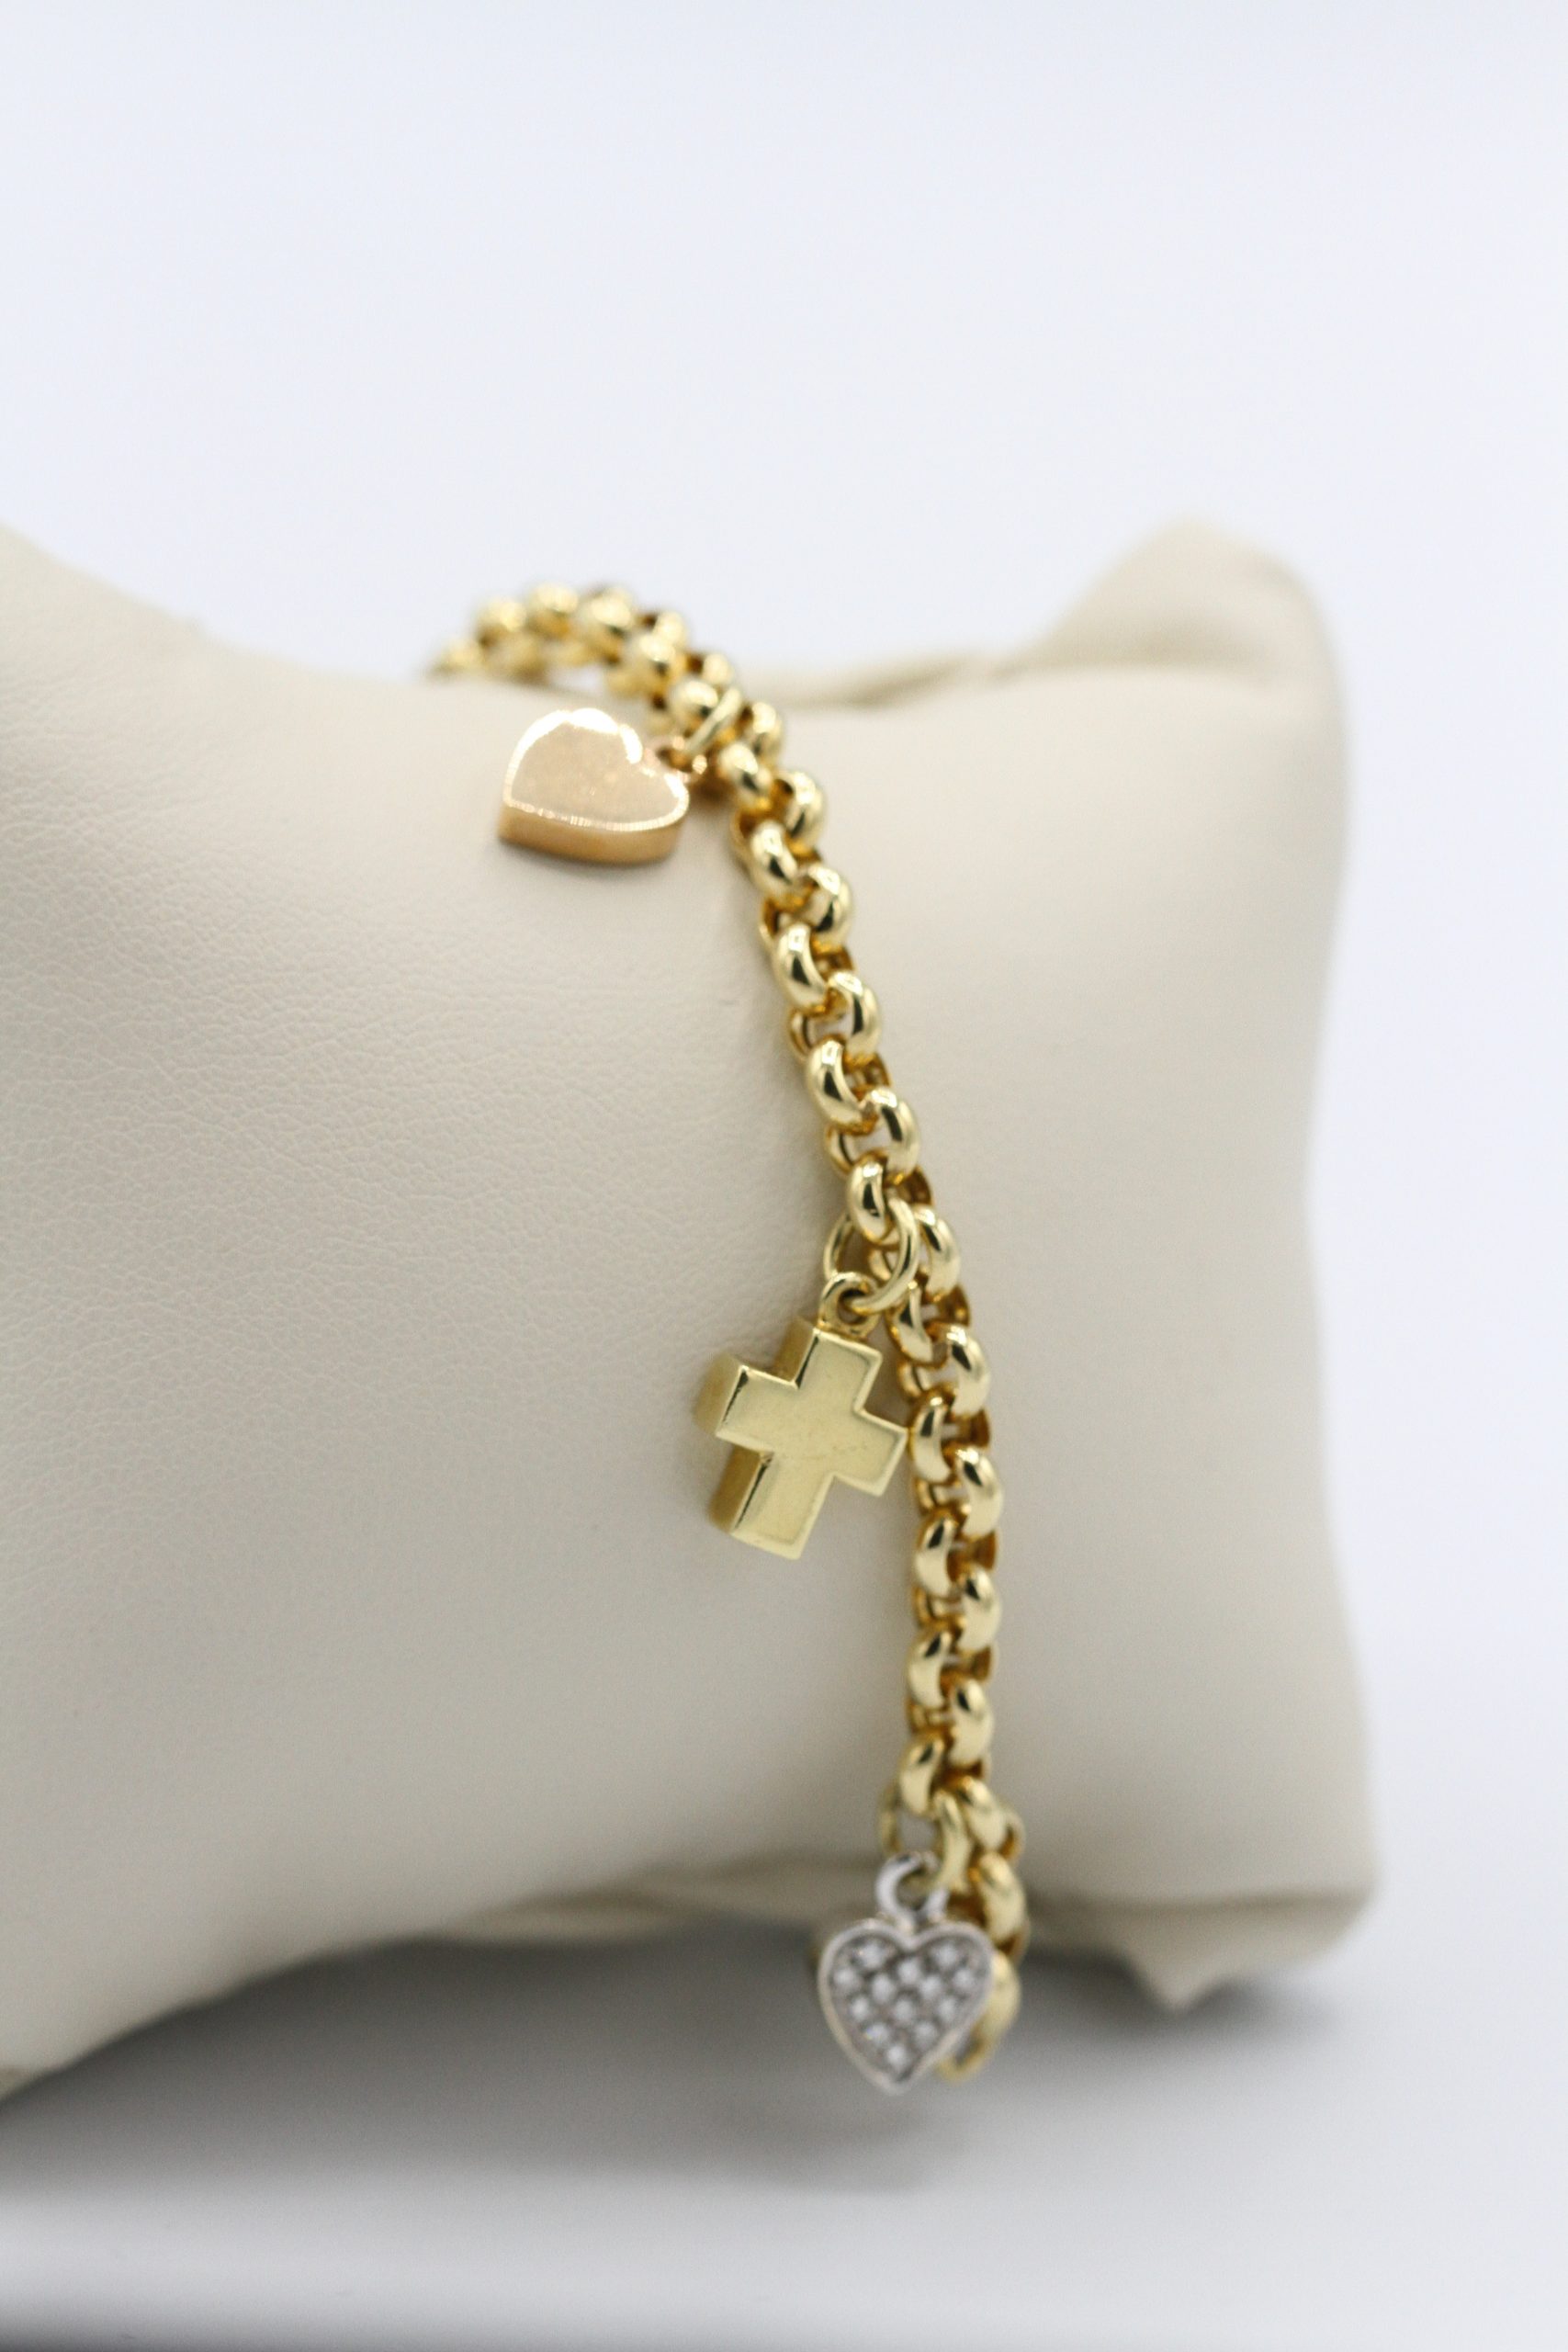 A gold bracelet with pendents dangling from it.